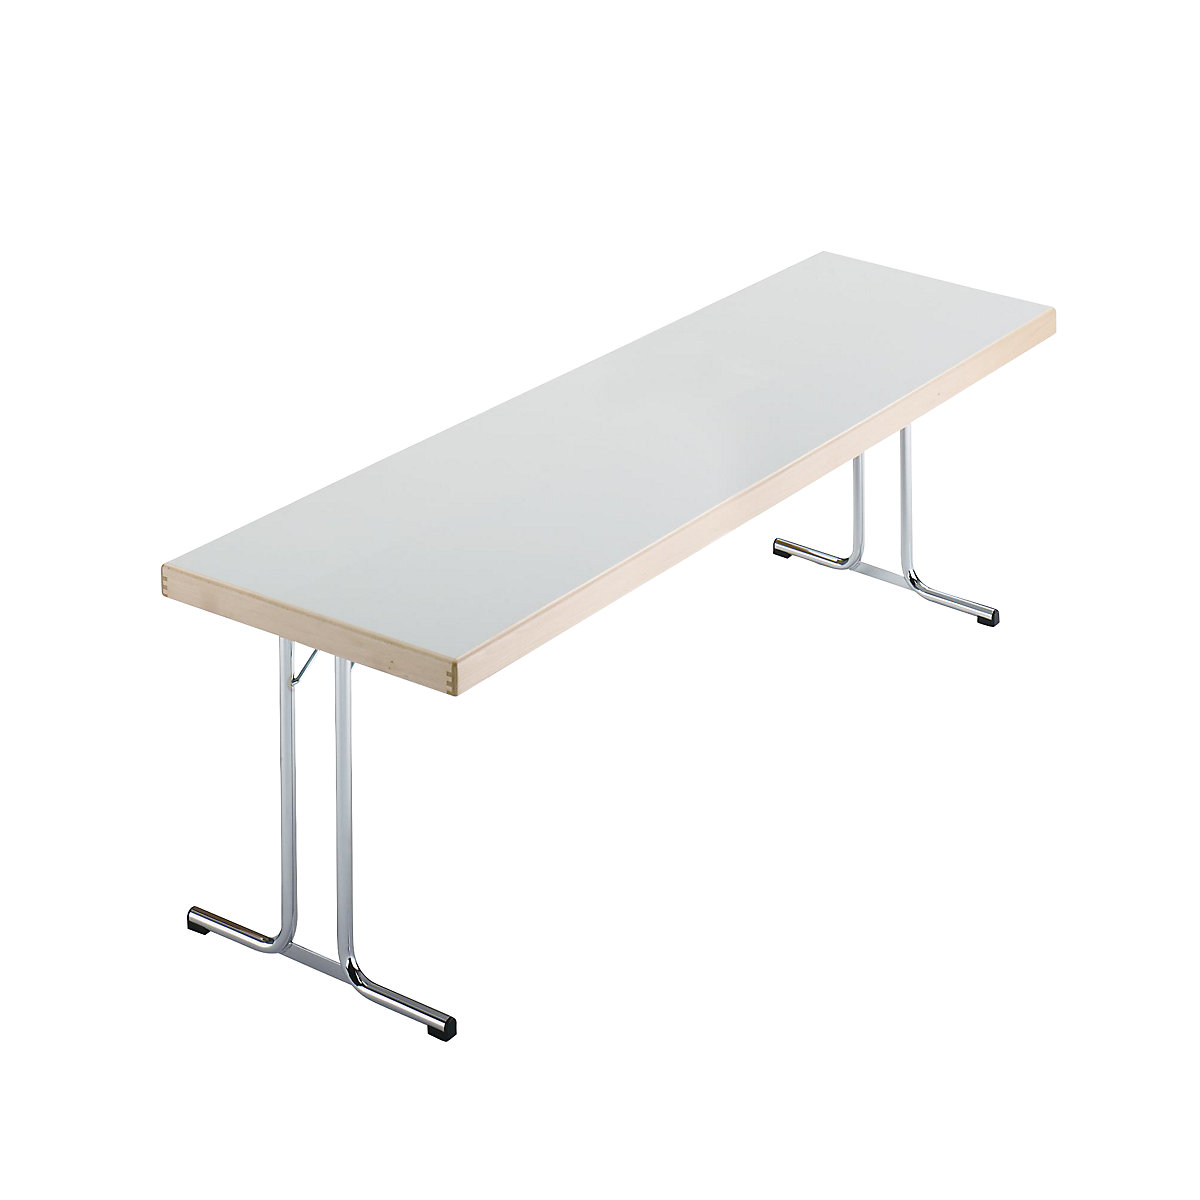 Folding table, double T-foot stand, 1700x700 mm, chrome-plated frame, light grey panel-15